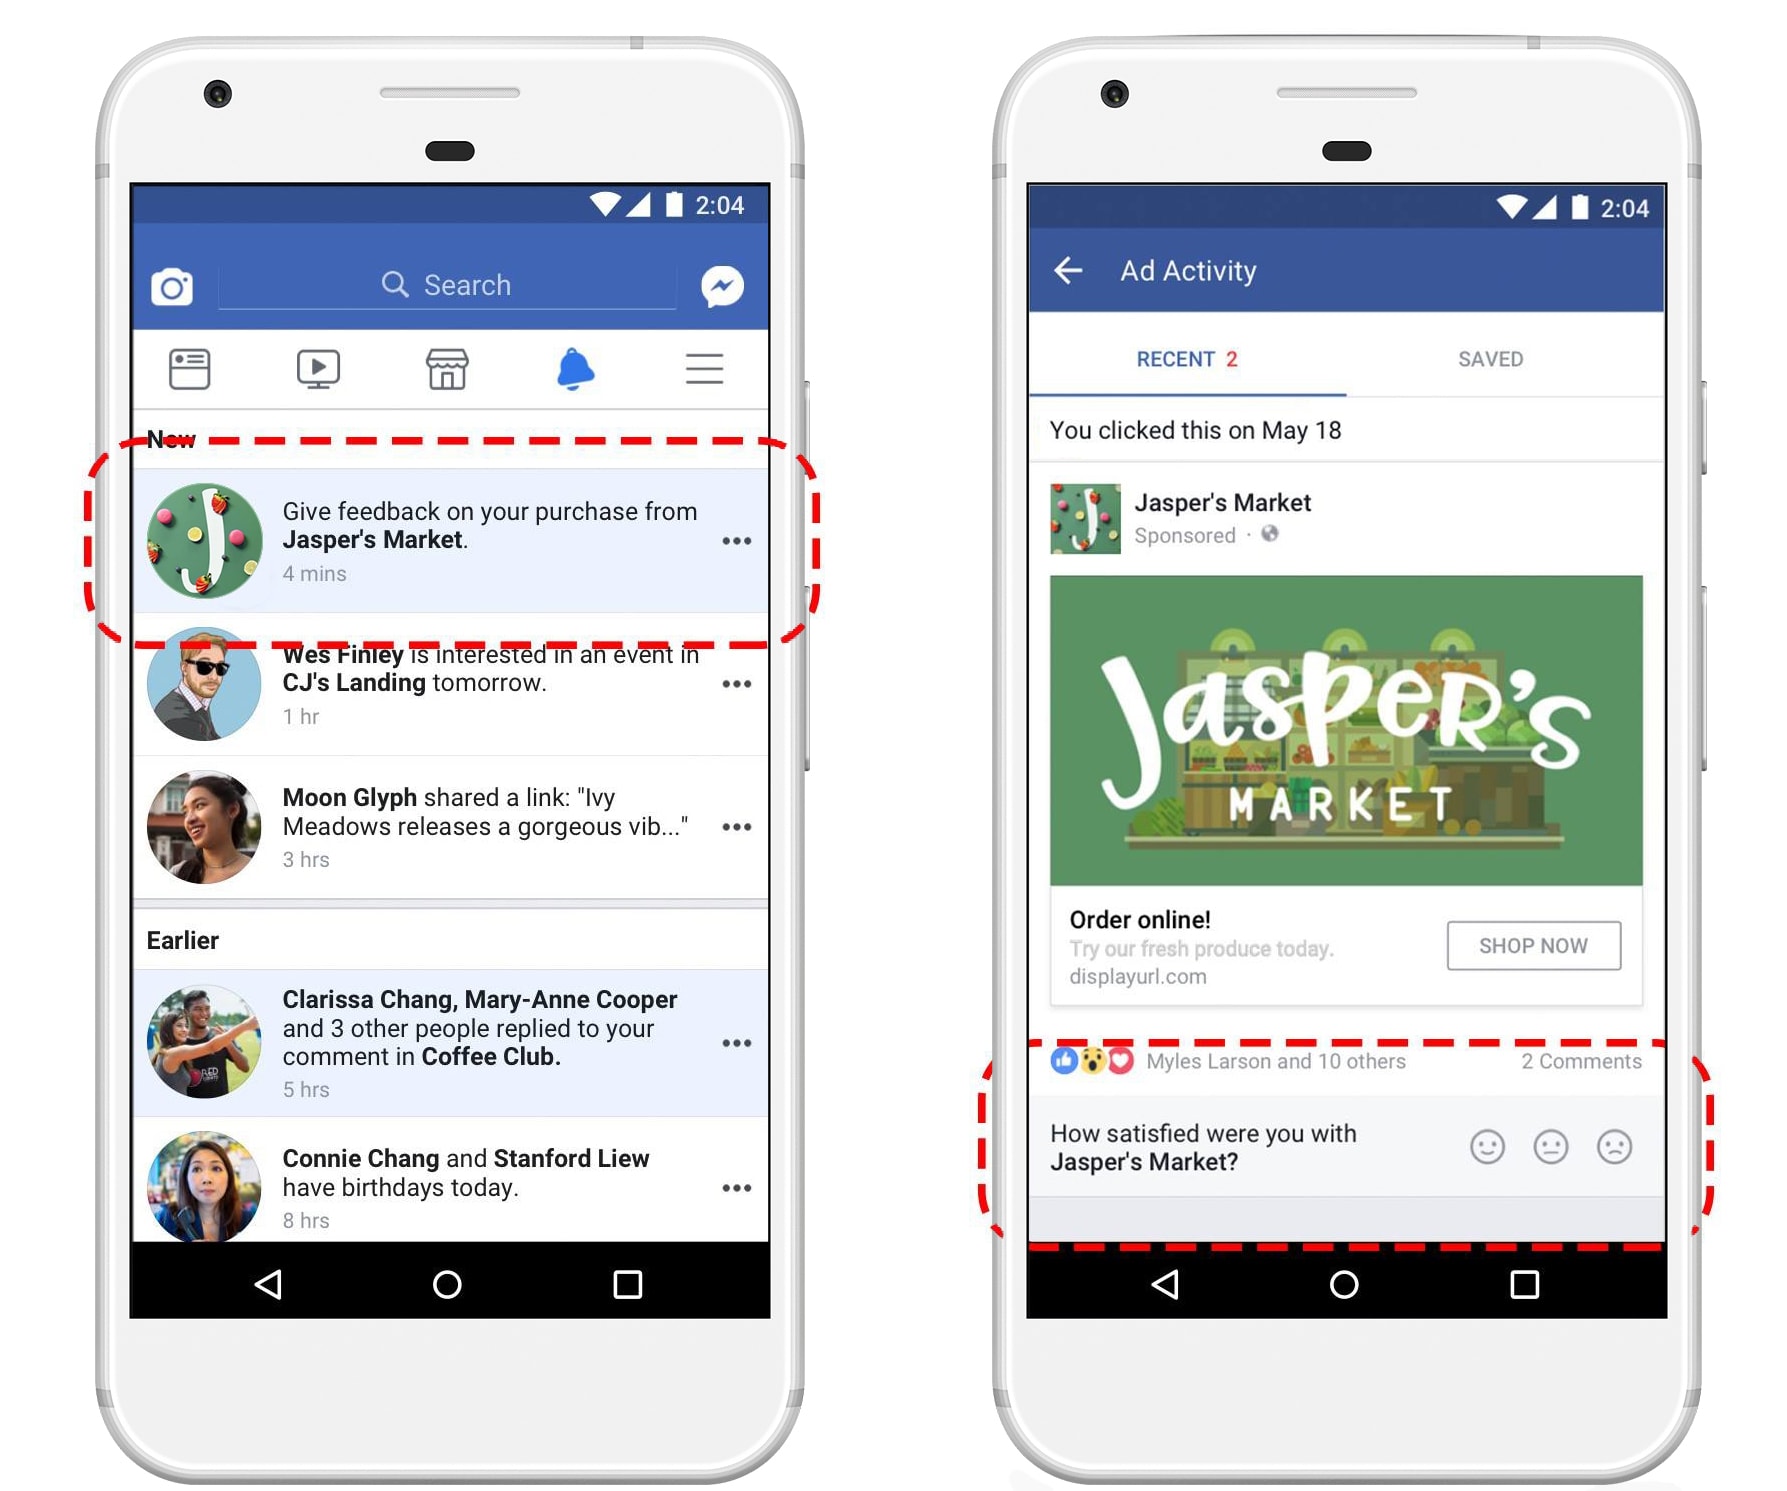 Facebook Will Ban Businesses From Running Ads if They Get Poor Customer Feedback